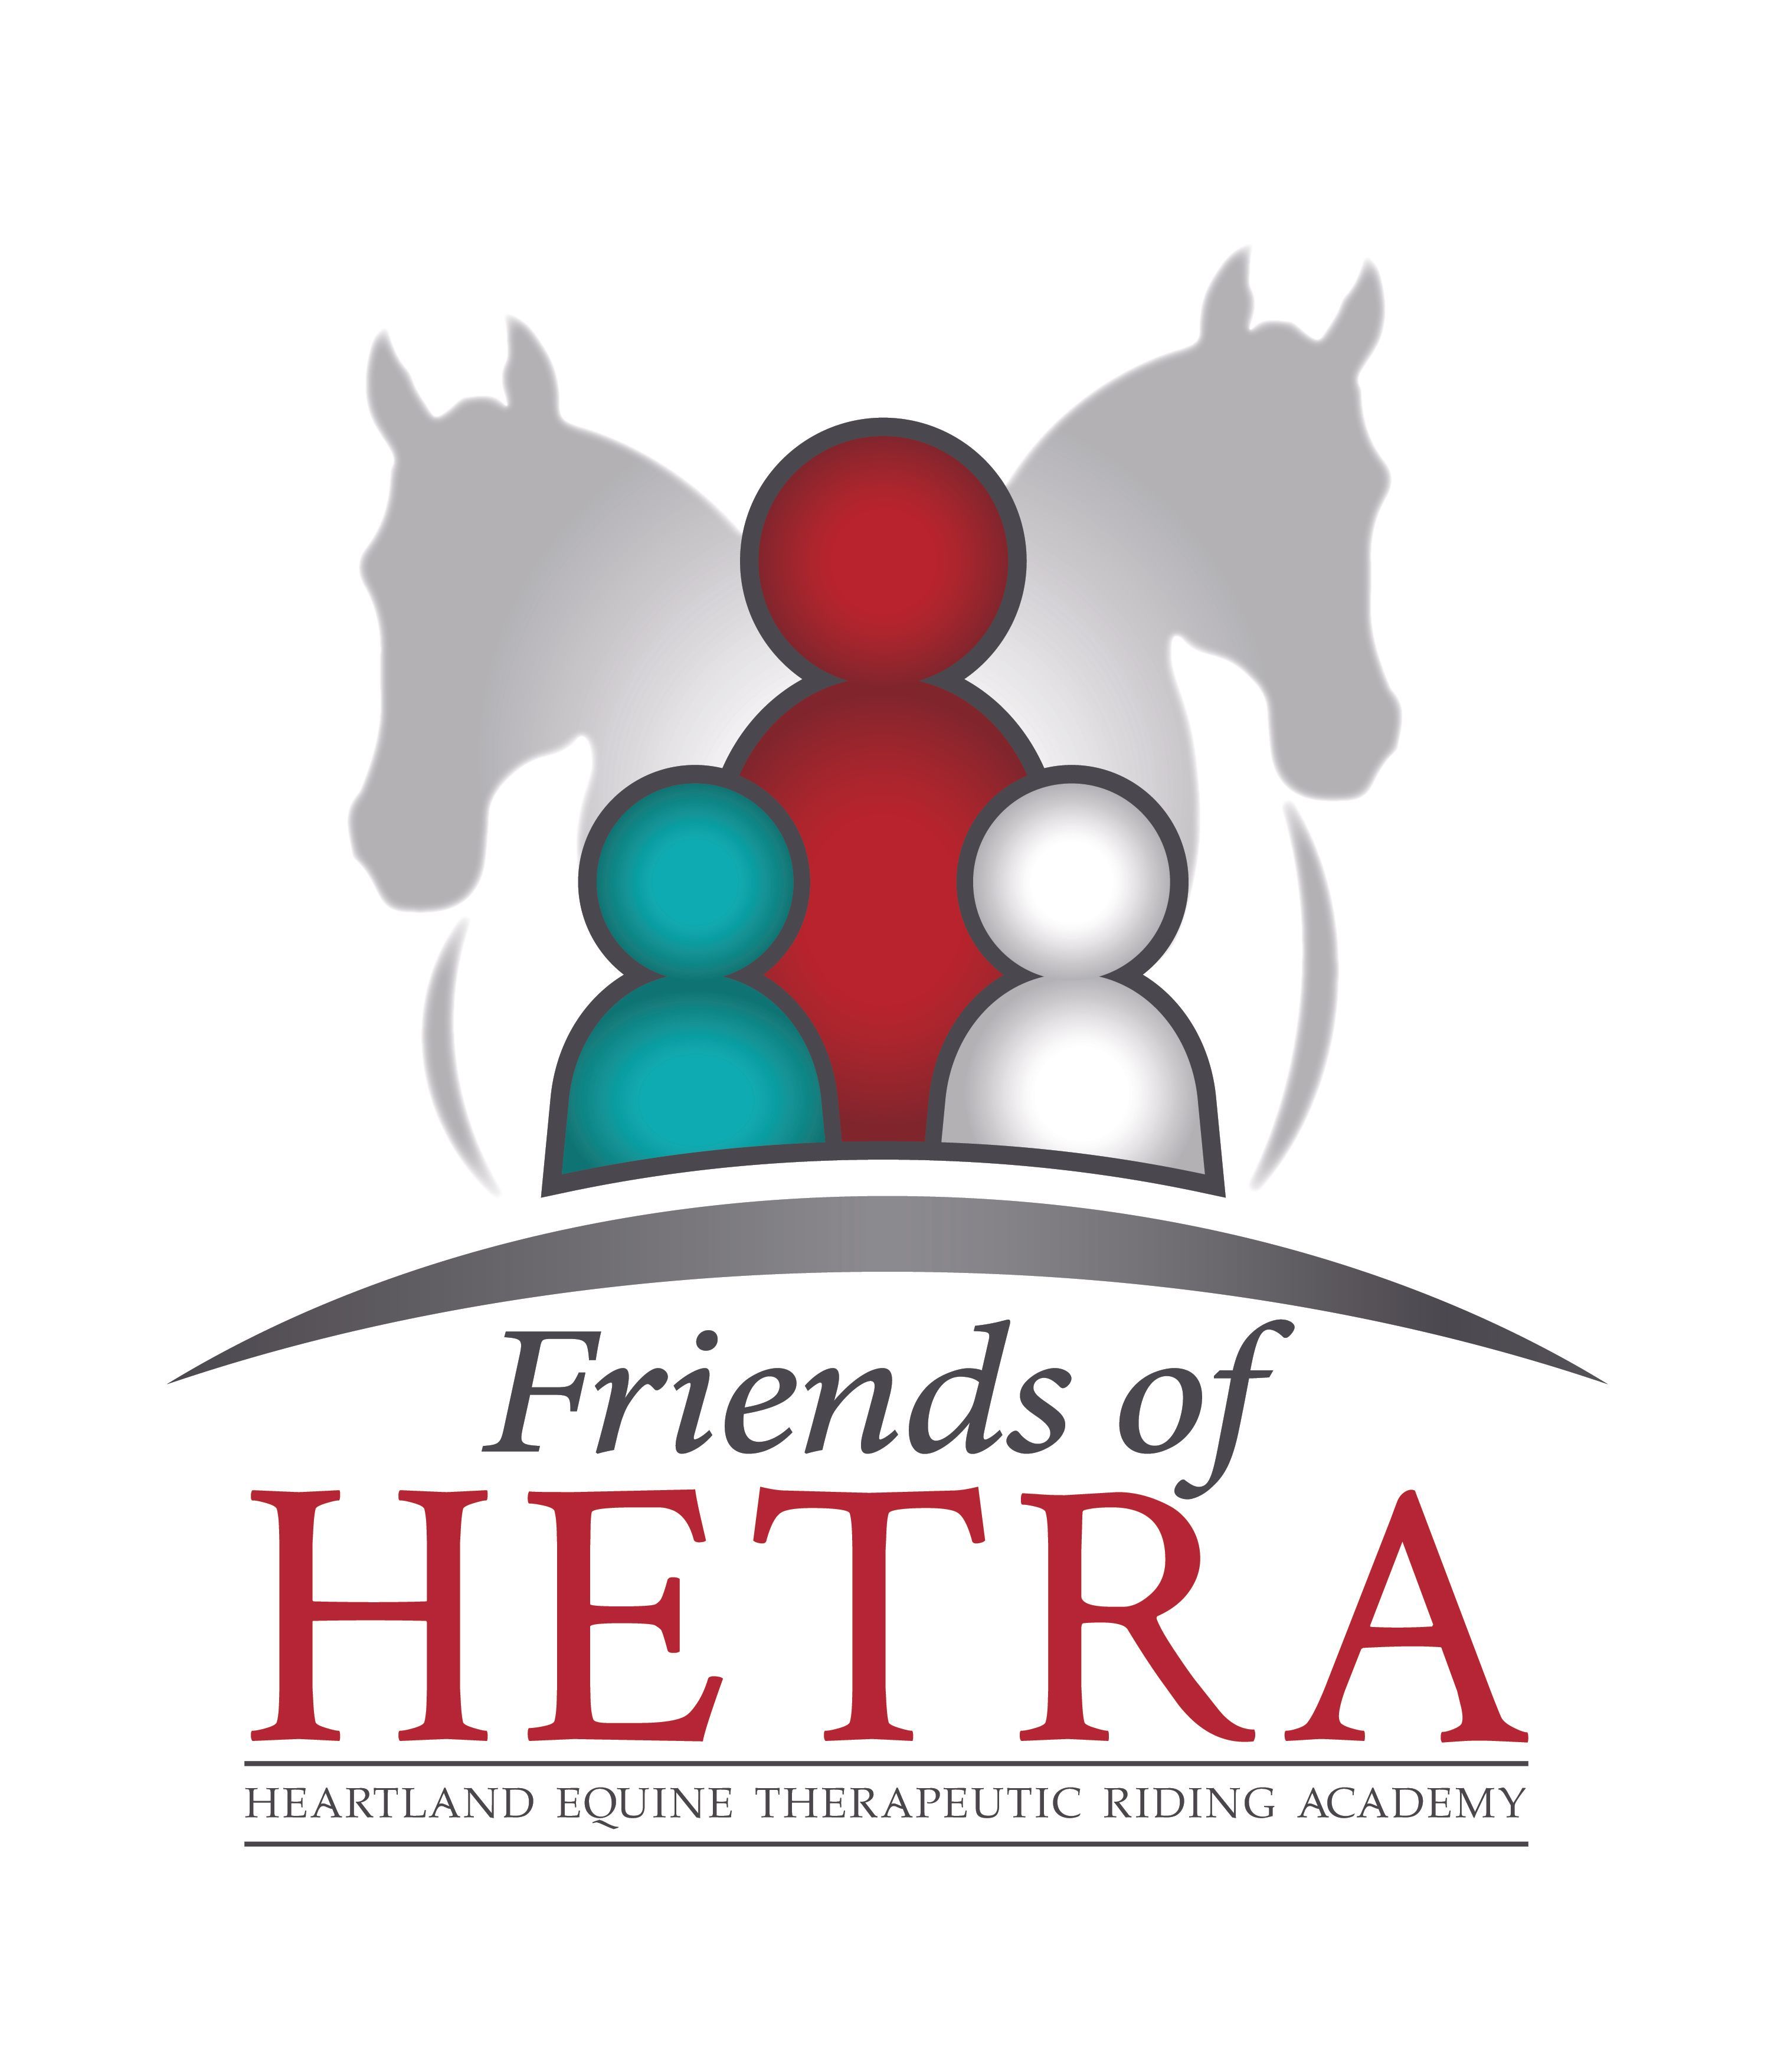 Become a Friend of HETRA